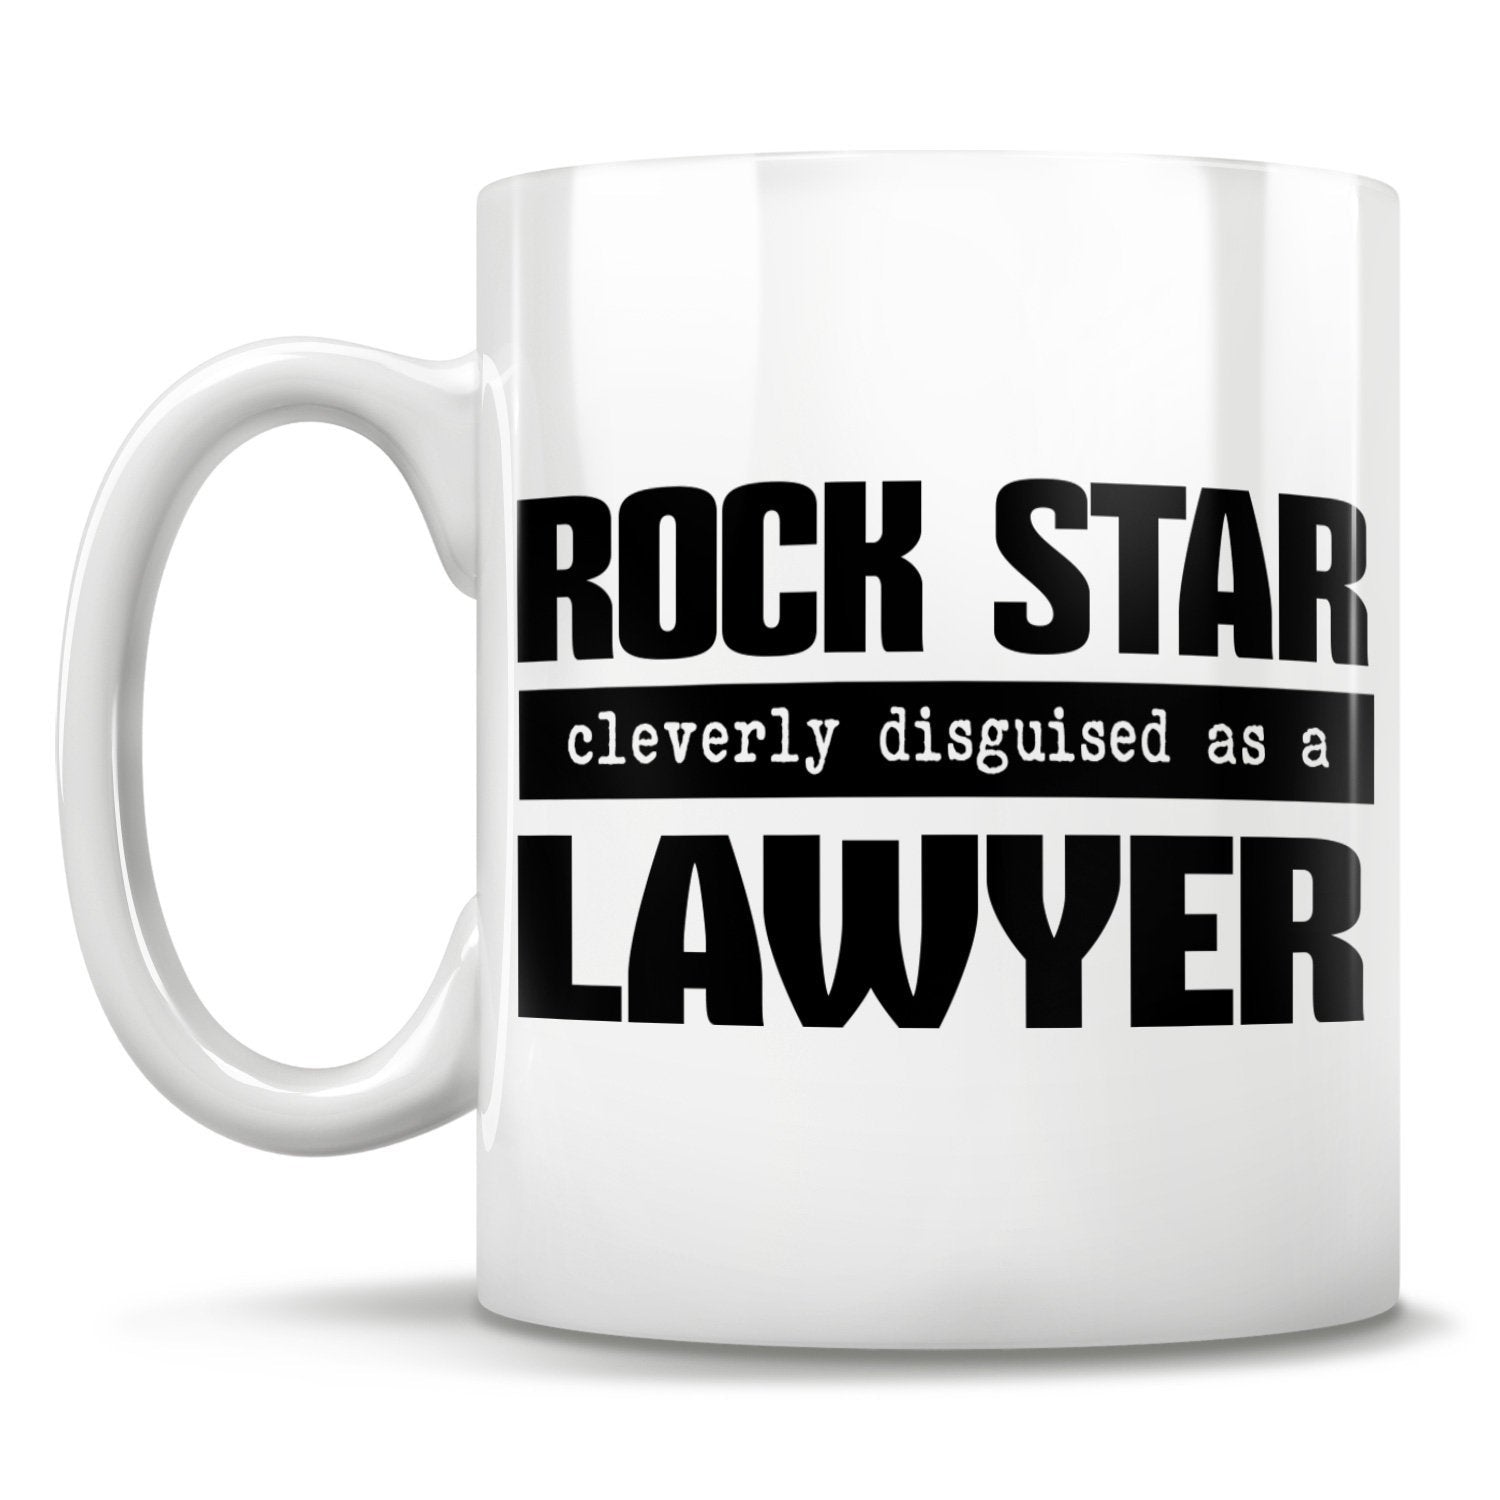 Lawyer Gift, Lawyer Cup, Lawyer Coffee Cup